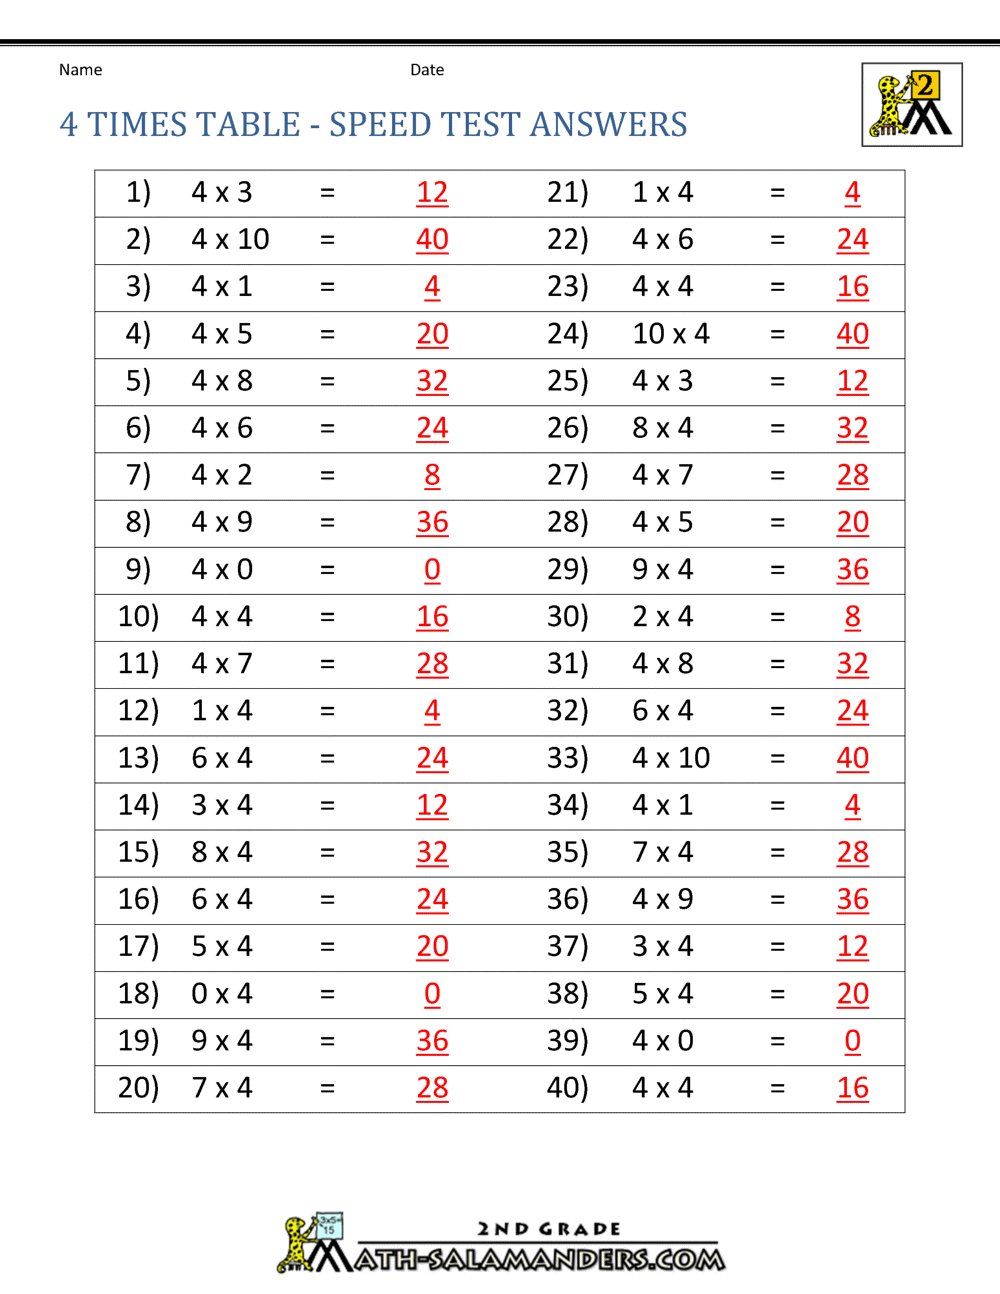 4 times table up to 12